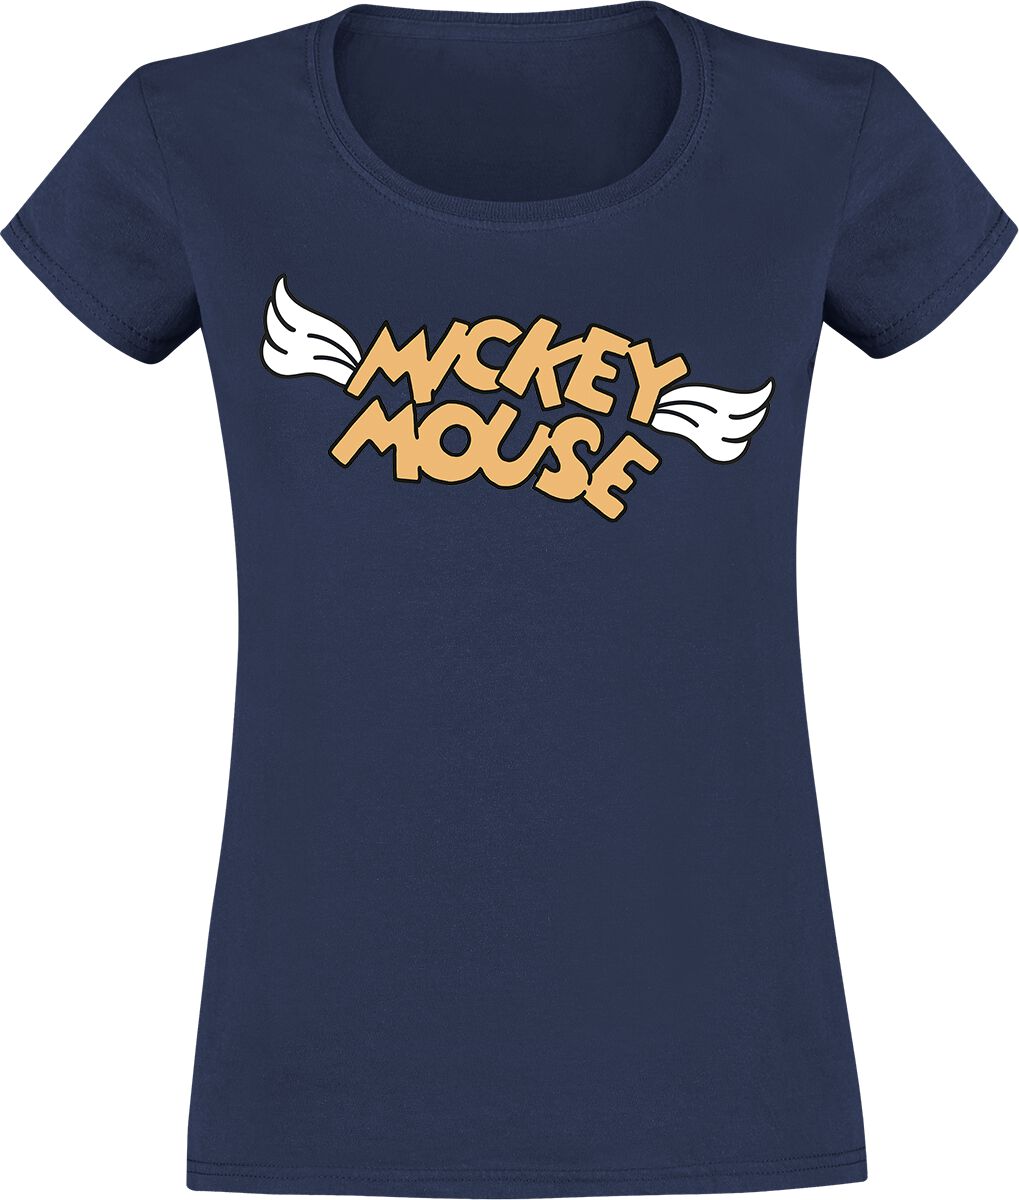 Wings T-Shirt blau von Mickey Mouse